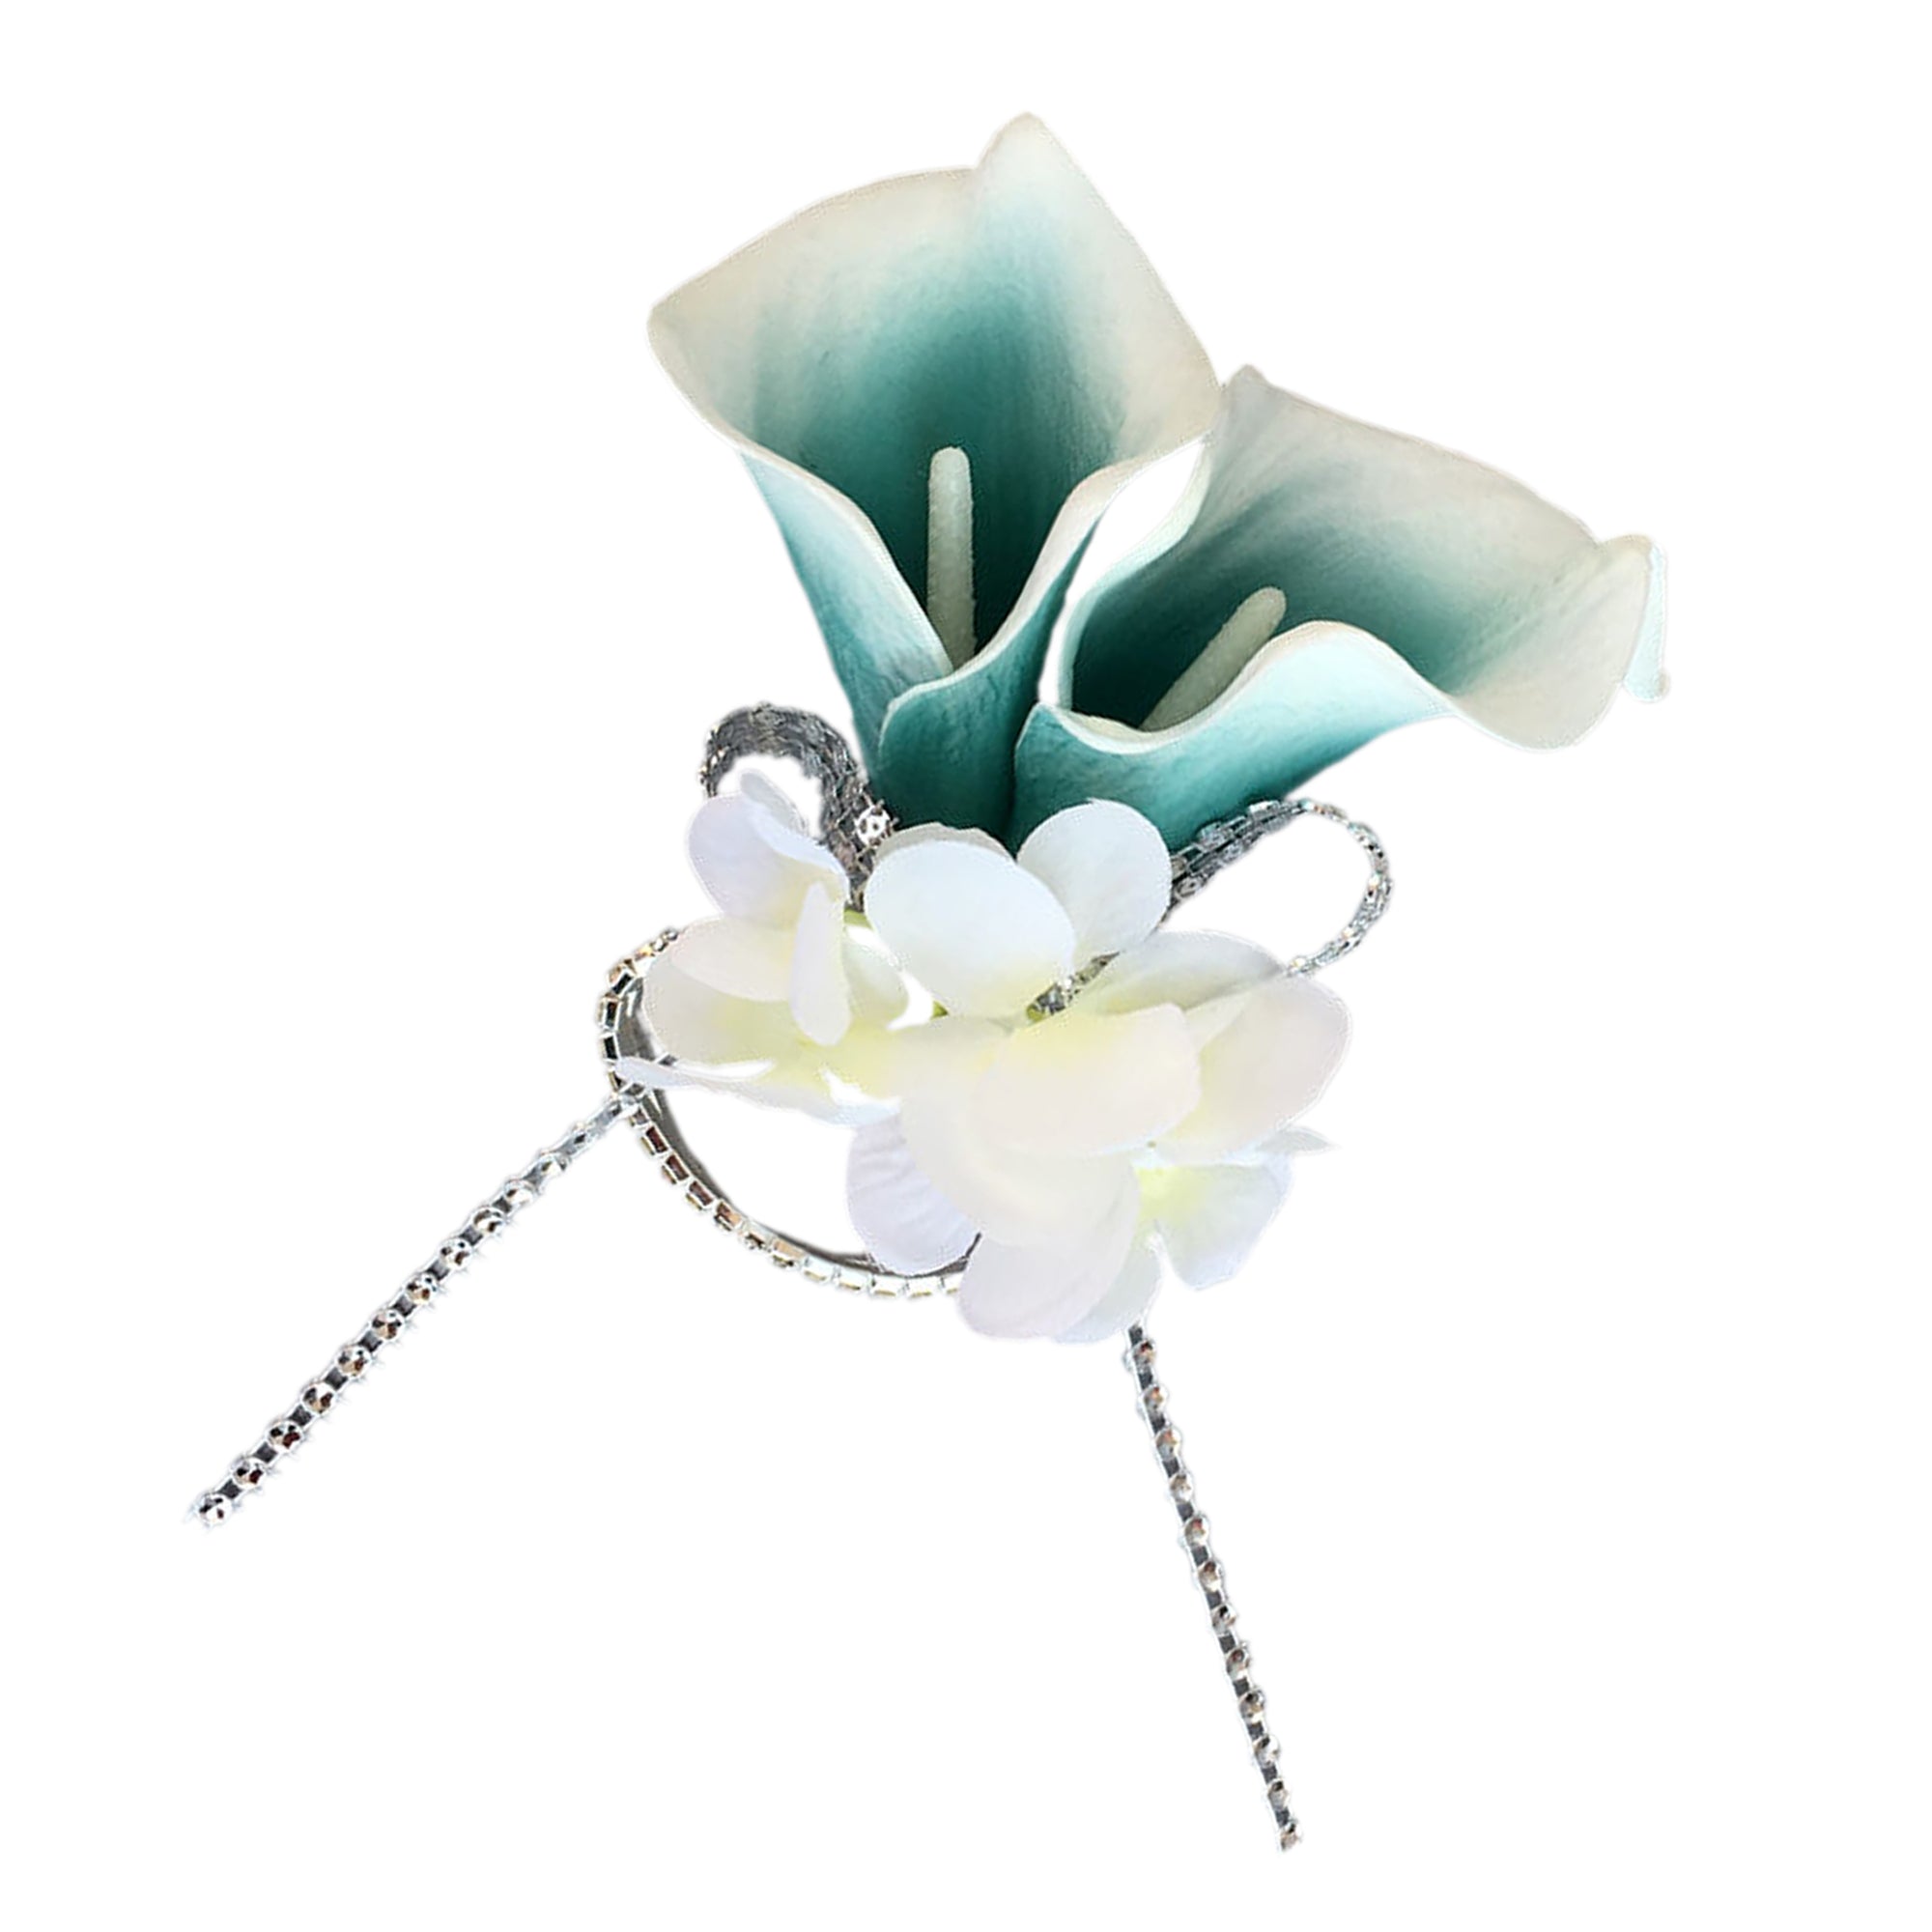 Wrist Corsage for Wedding Oasis Teal Calla Lily Bracelet Corsage